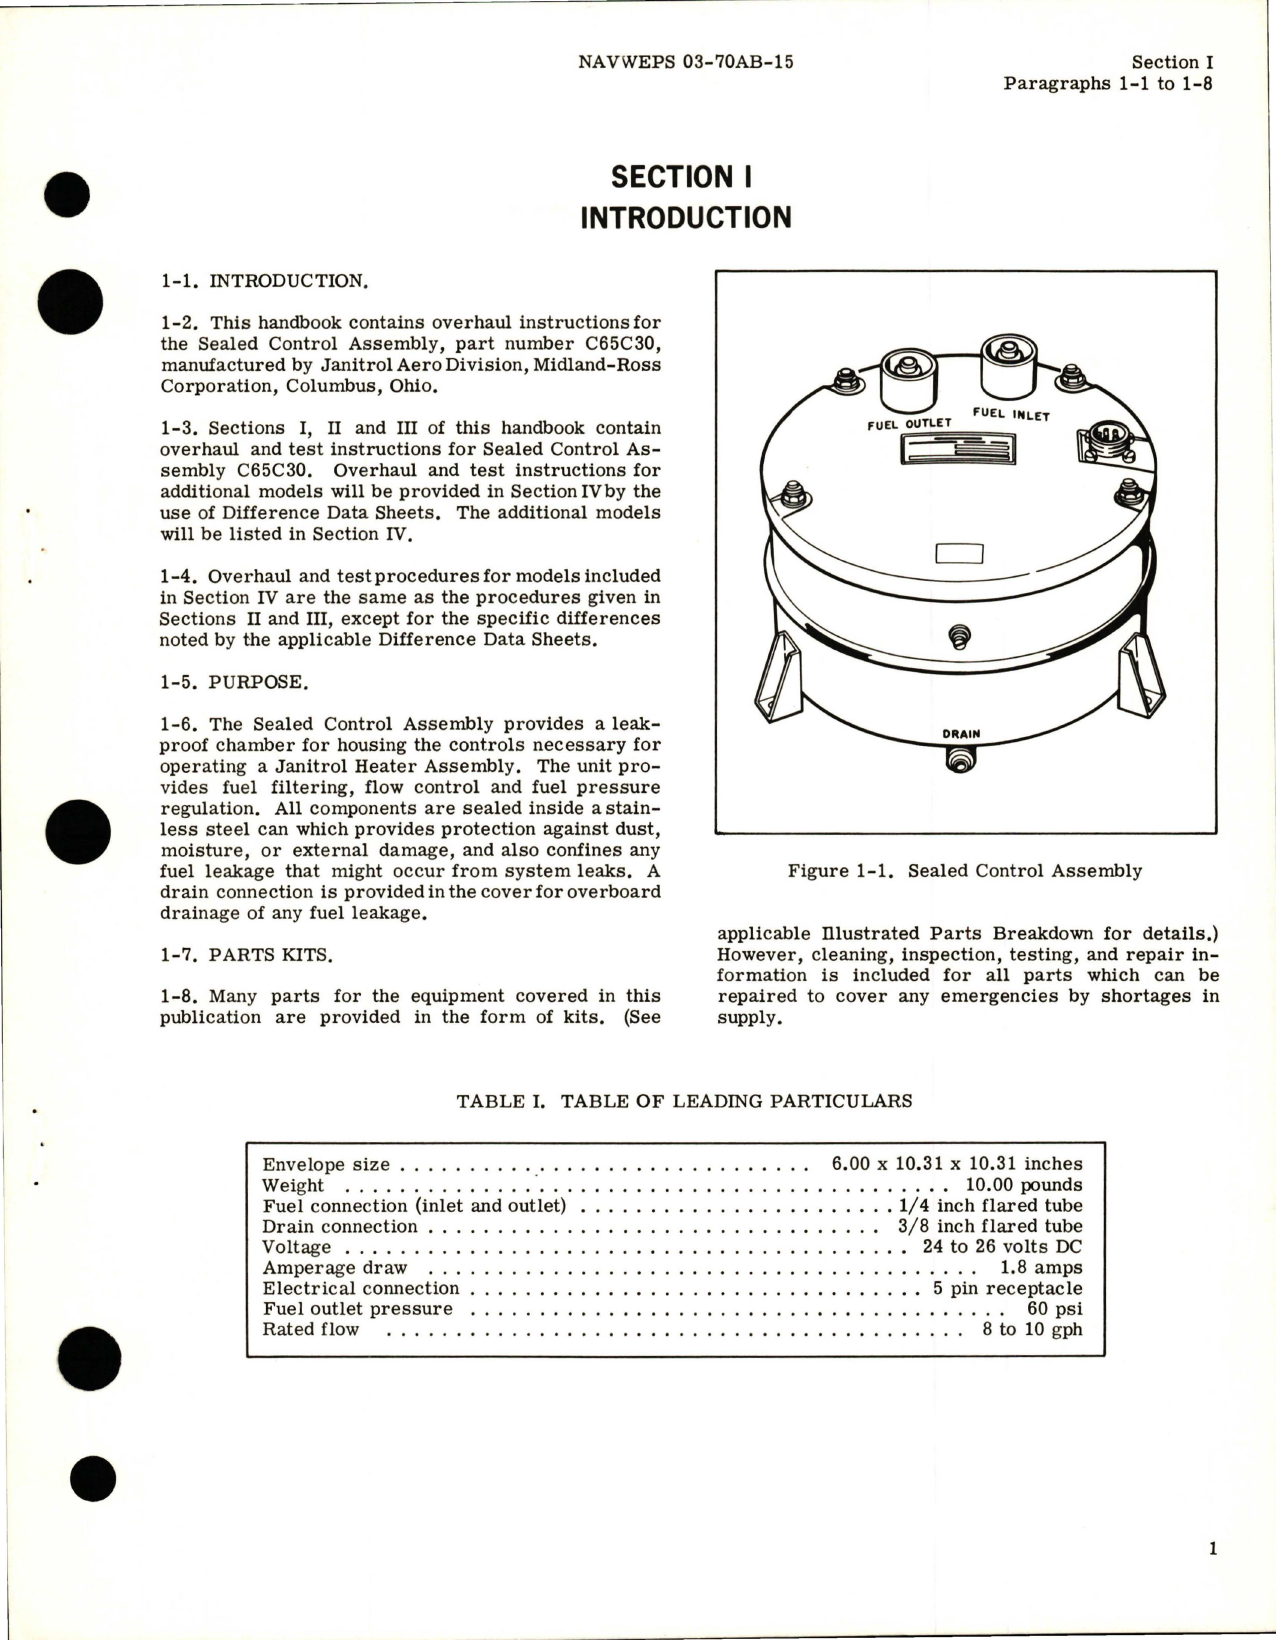 Sample page 5 from AirCorps Library document: Overhaul Instructions for Sealed Control Assembly - Part C65C30